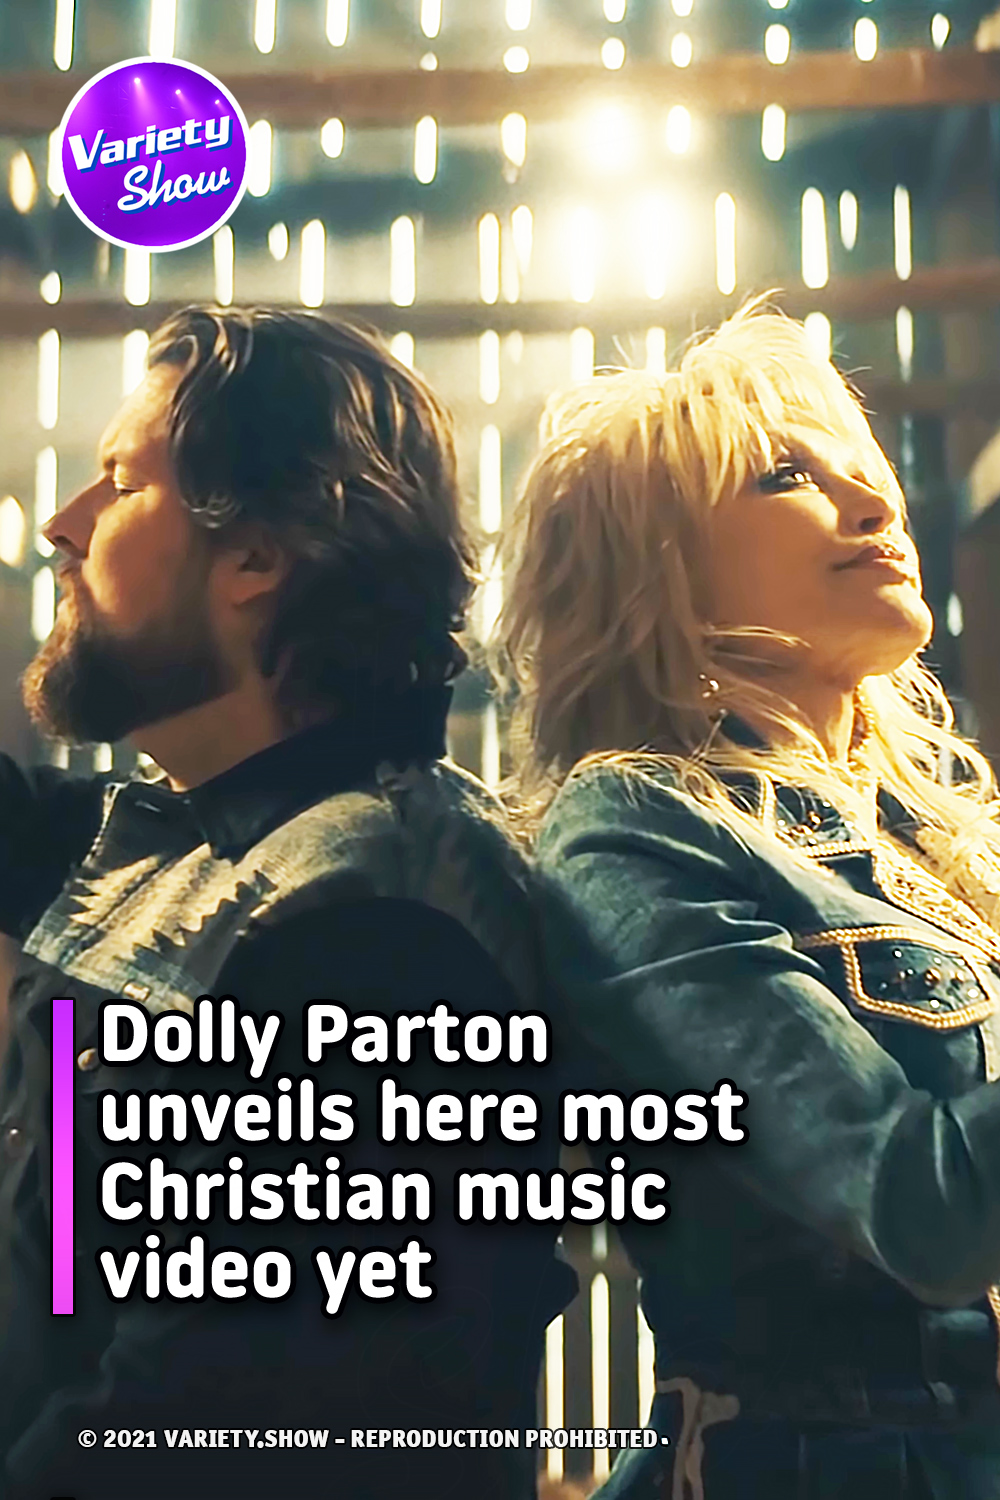 Dolly Parton unveils here most Christian music video yet